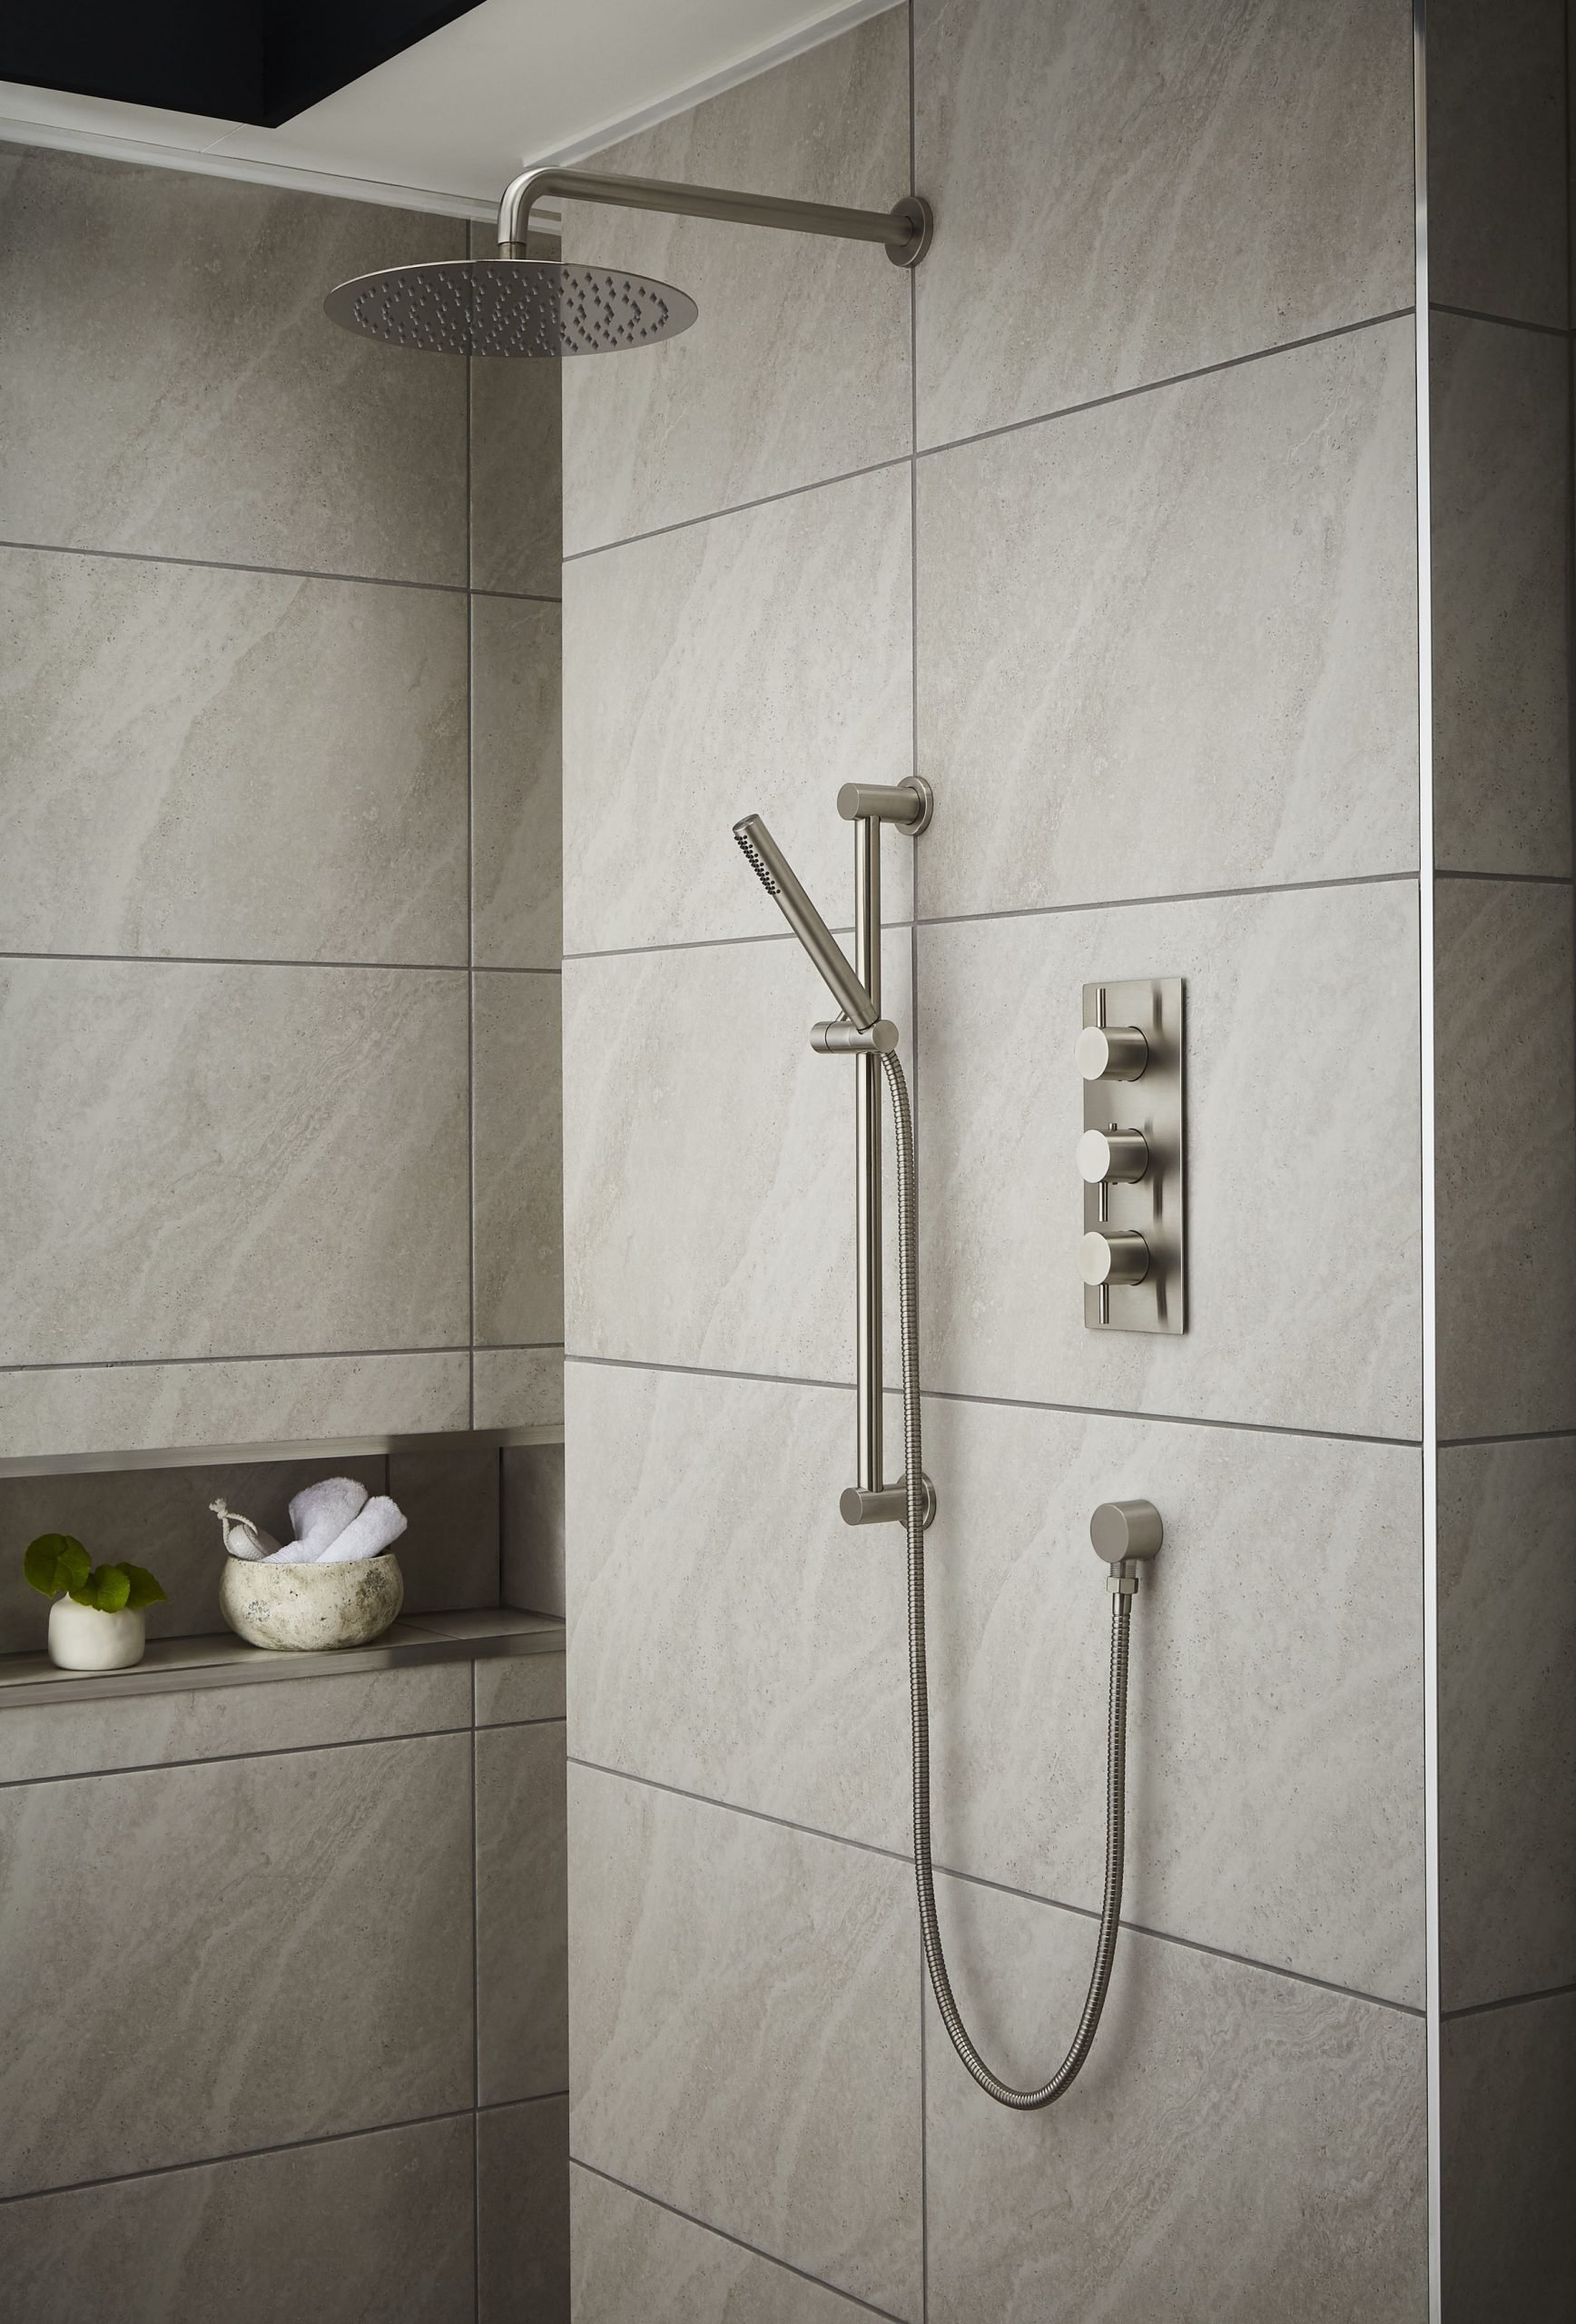 an image of a shower riser rail fitted in a shower